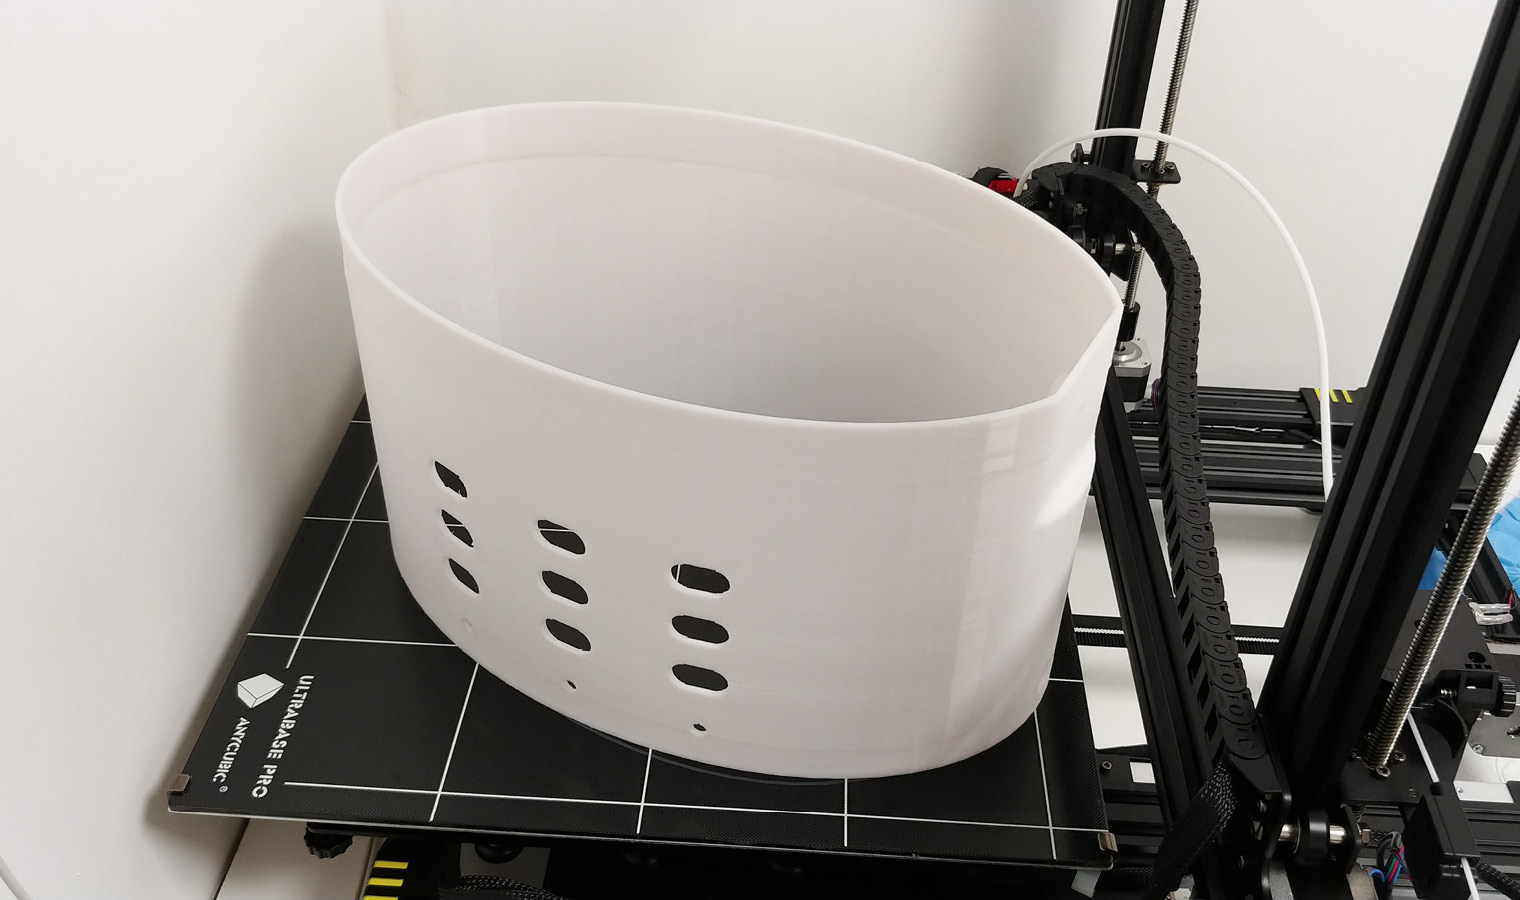 3D printed toaster parts